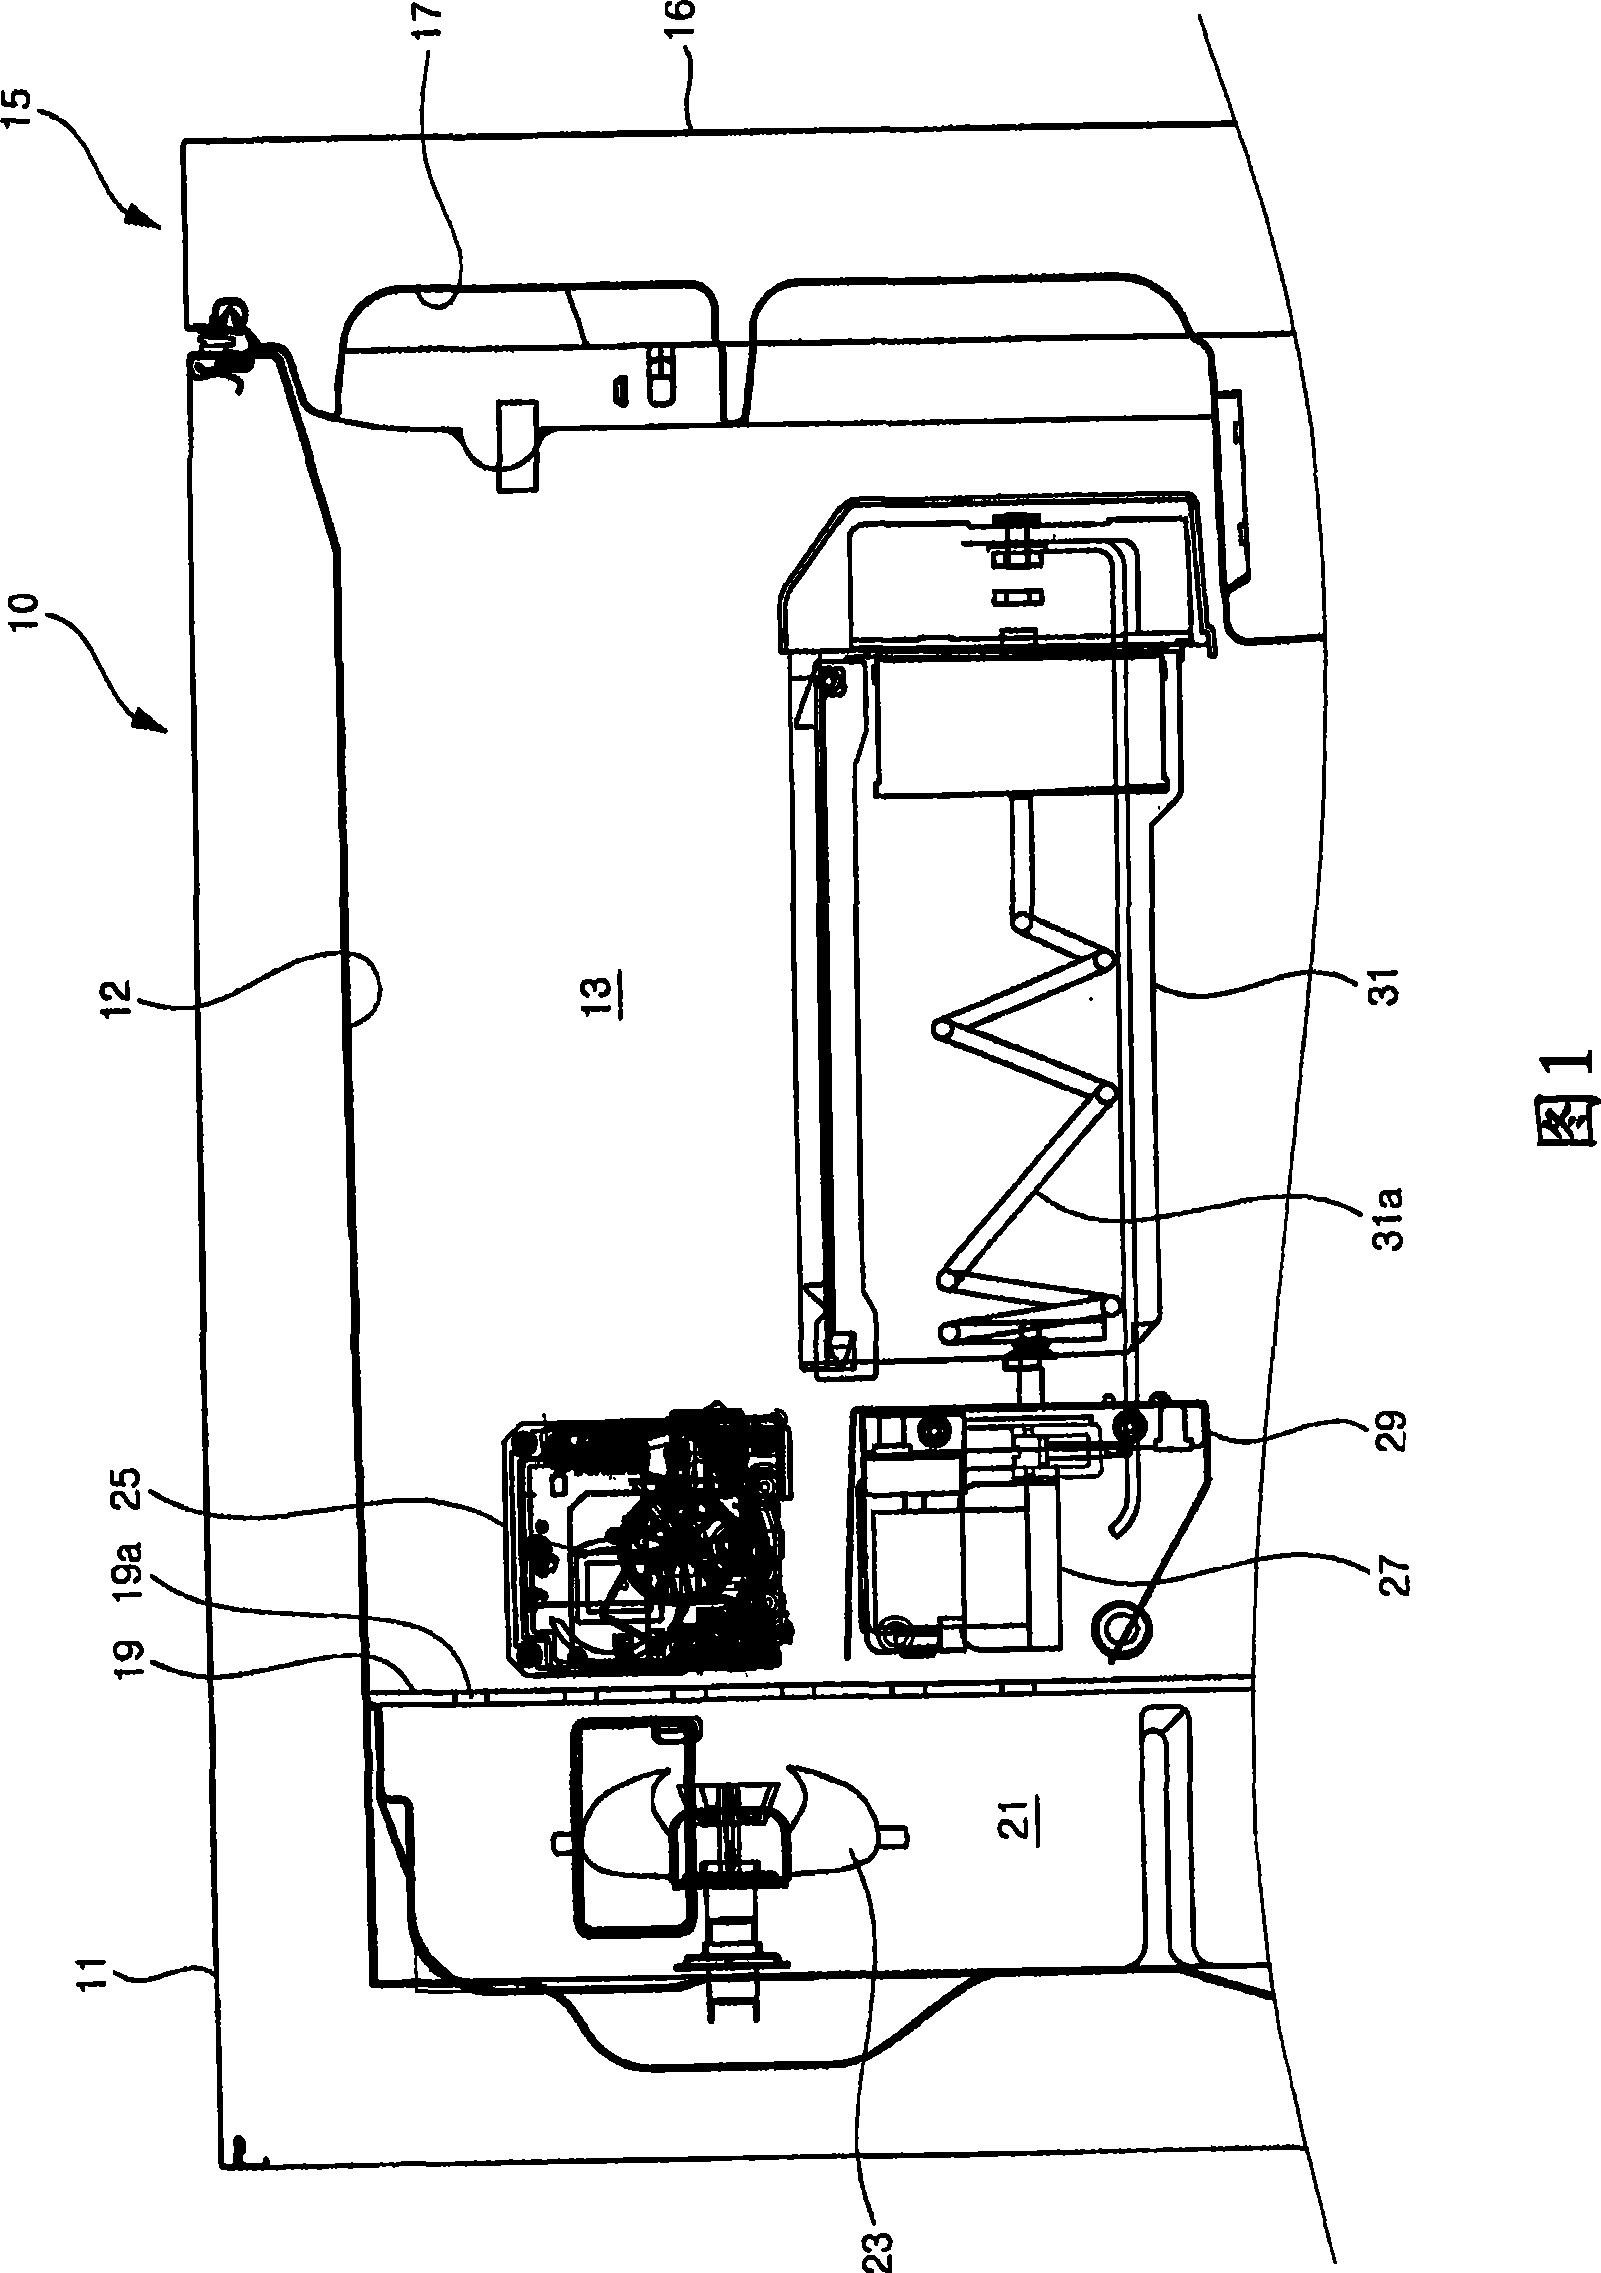 Ice-making device for refrigerator